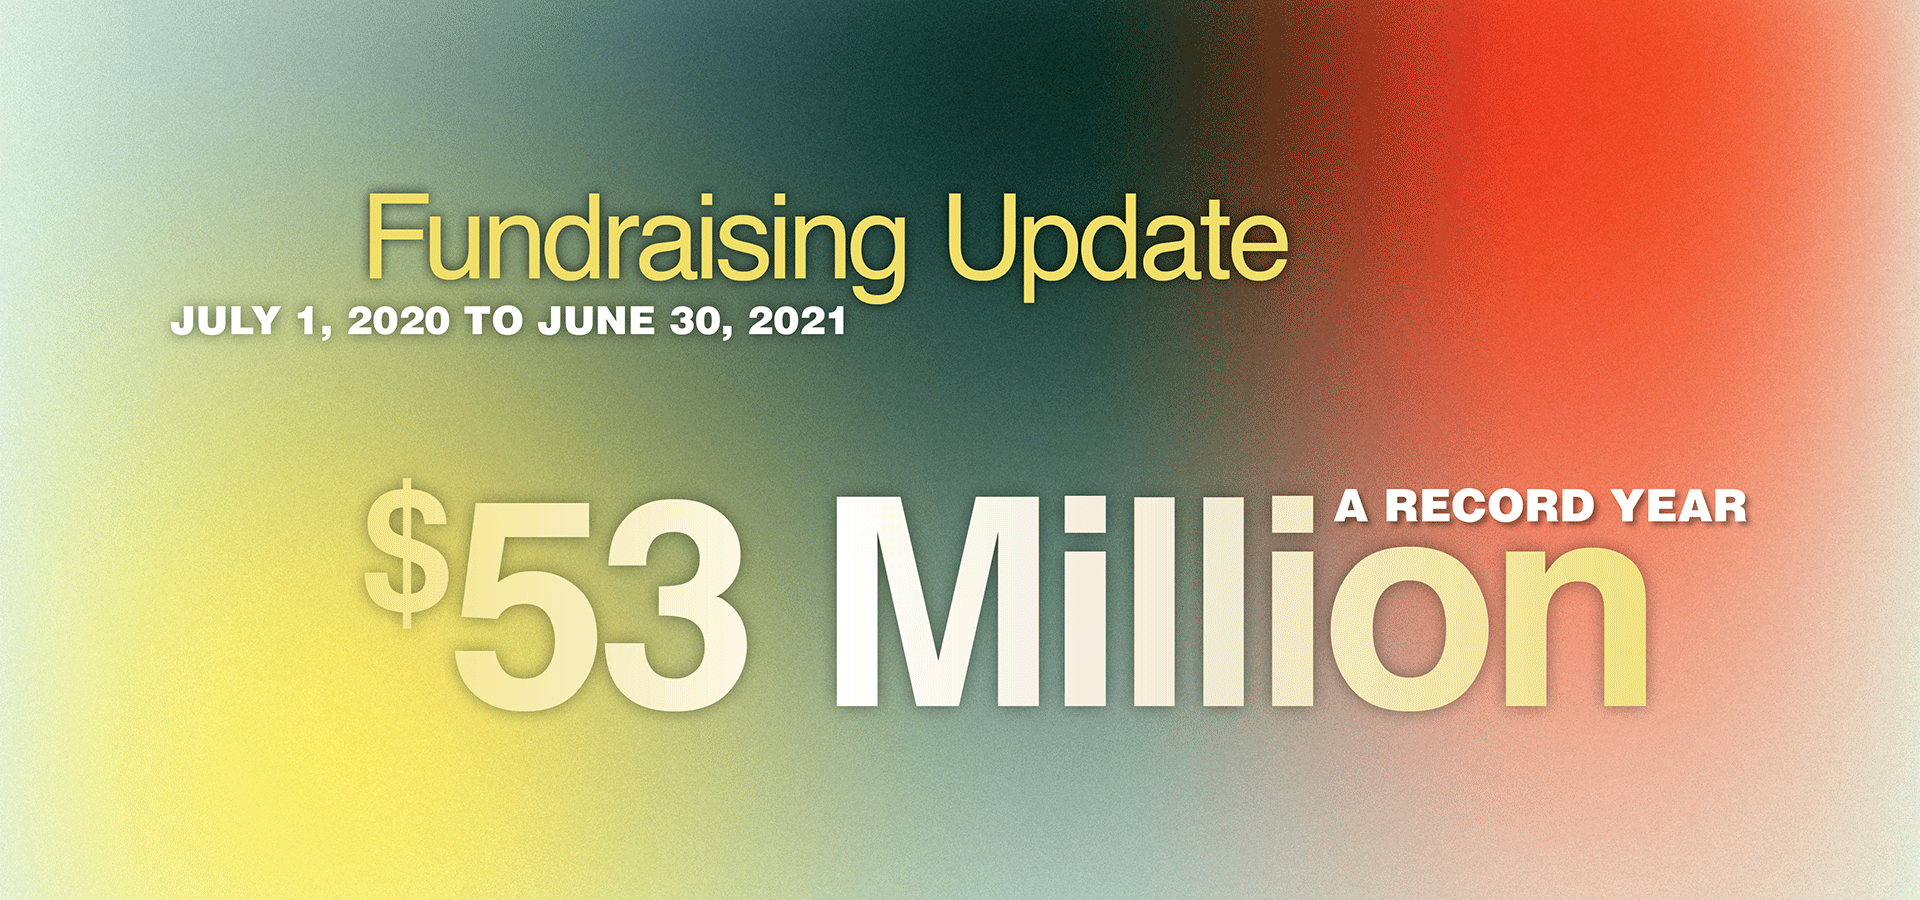 Fundraising Update July 1, 2020 to June 30, 2021. $53 million. A record year.